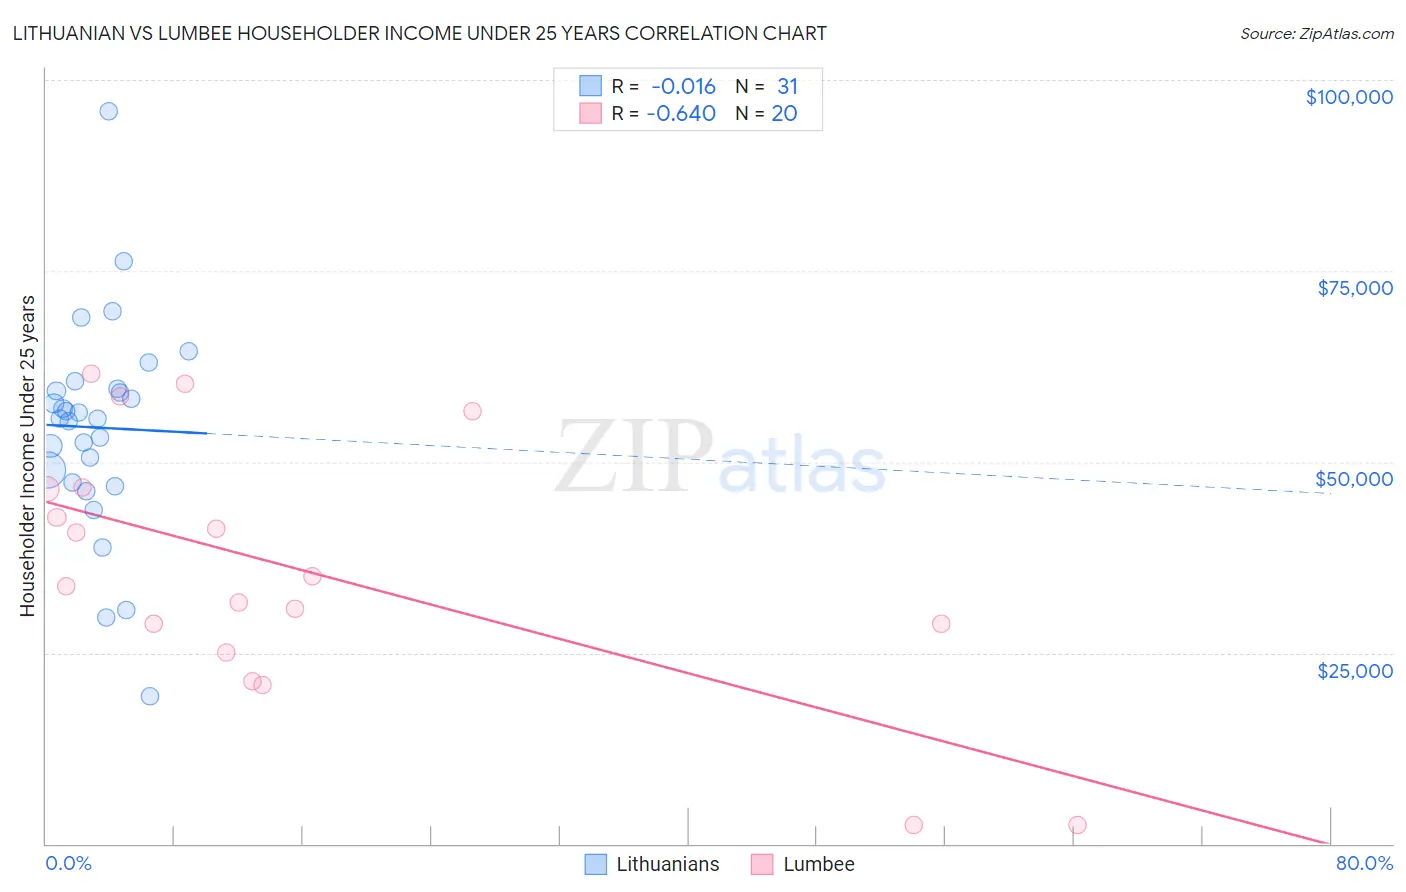 Lithuanian vs Lumbee Householder Income Under 25 years